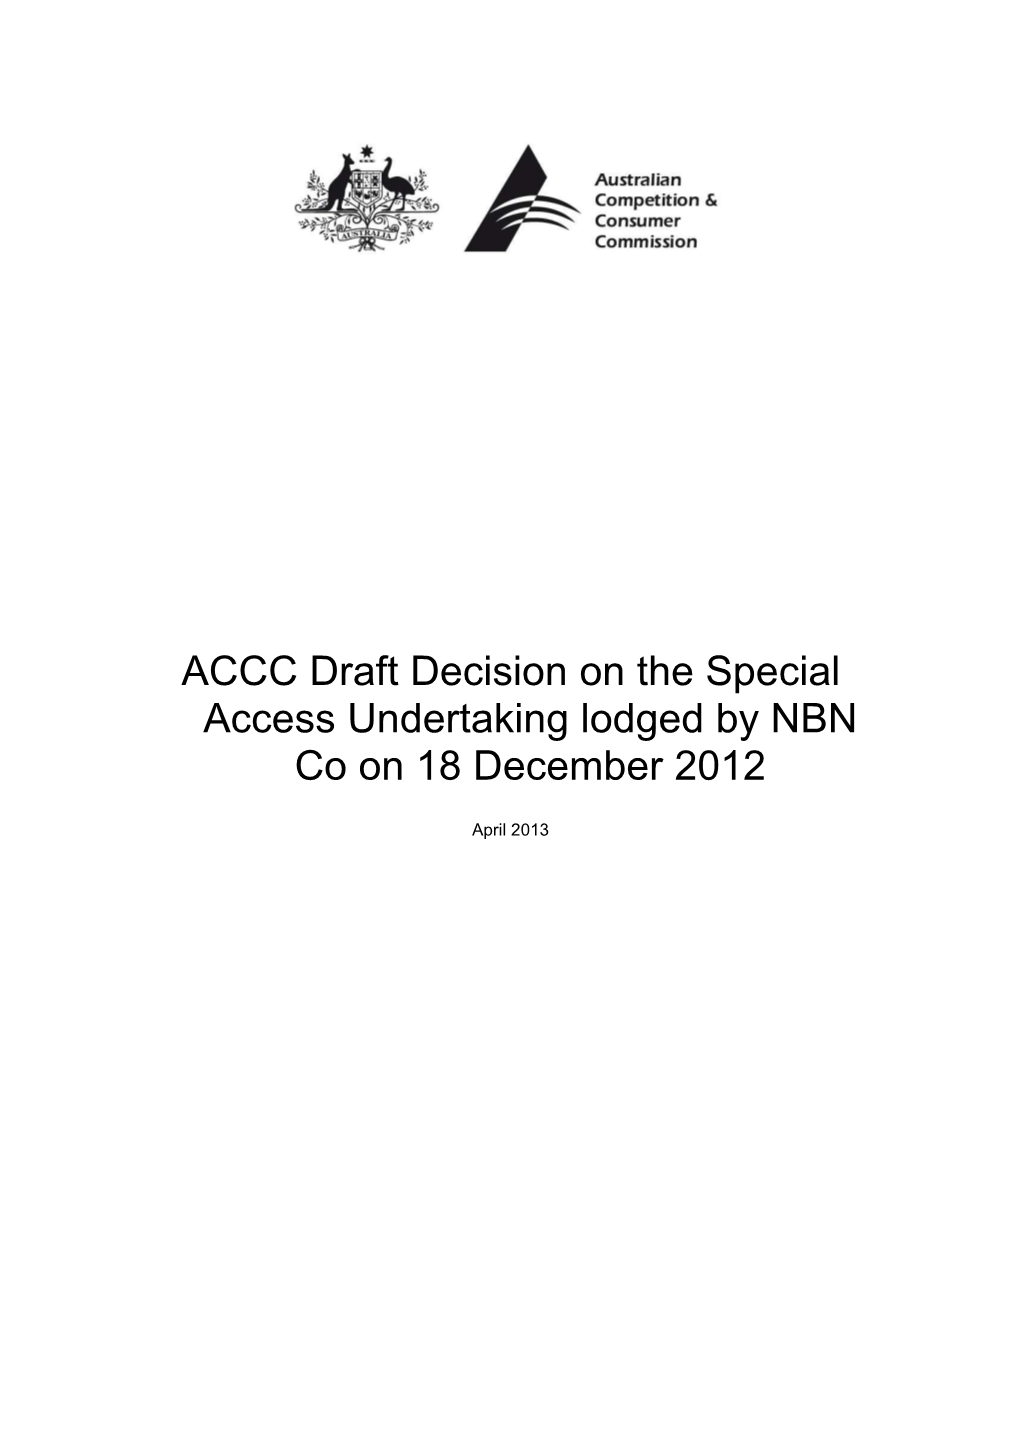 ACCC Draft Decision on the Special Access Undertaking Lodged by NBN Co on 18 December 2012